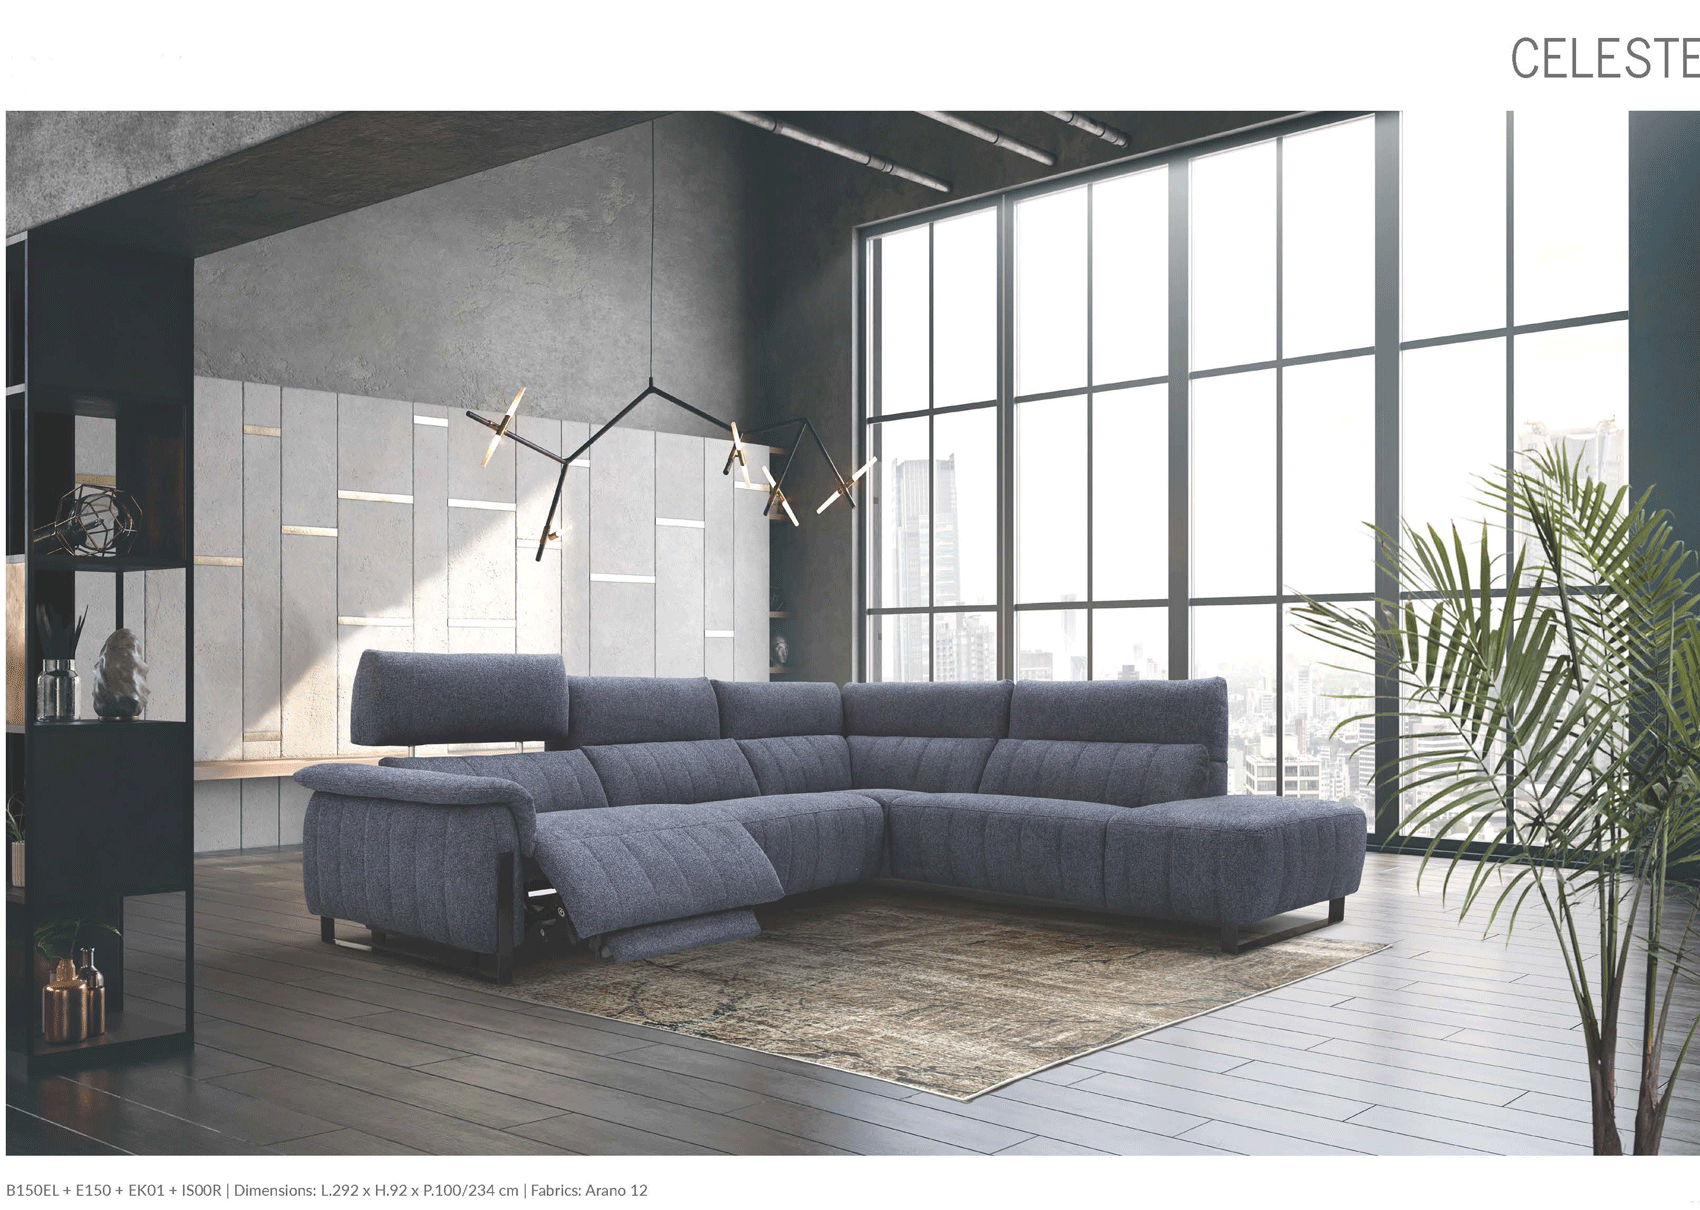 Living Room Furniture Sofas Loveseats and Chairs Celeste Sectional